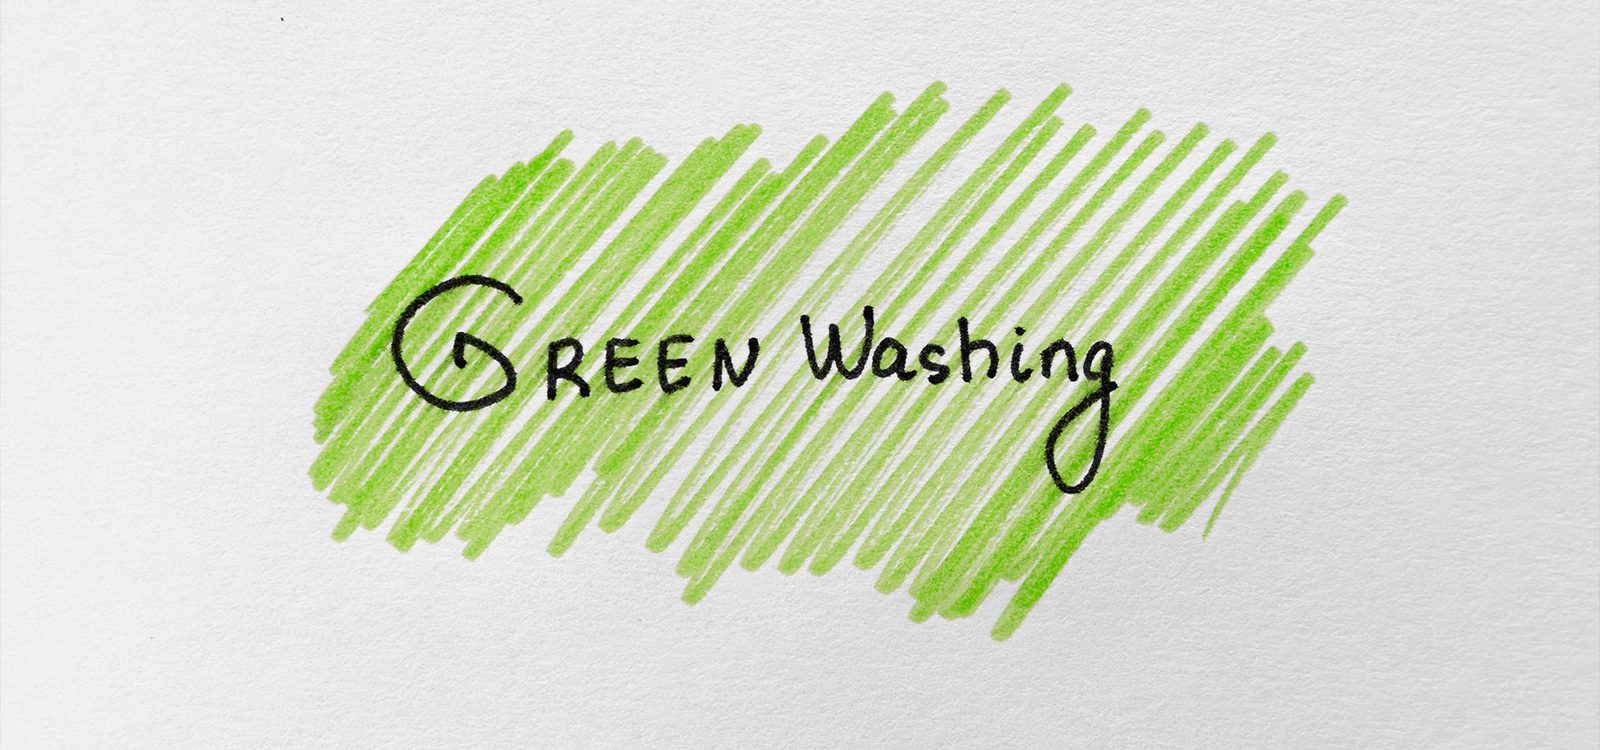 Are your climate-risk disclosures exposing you to potential ‘greenwashing’ claims?